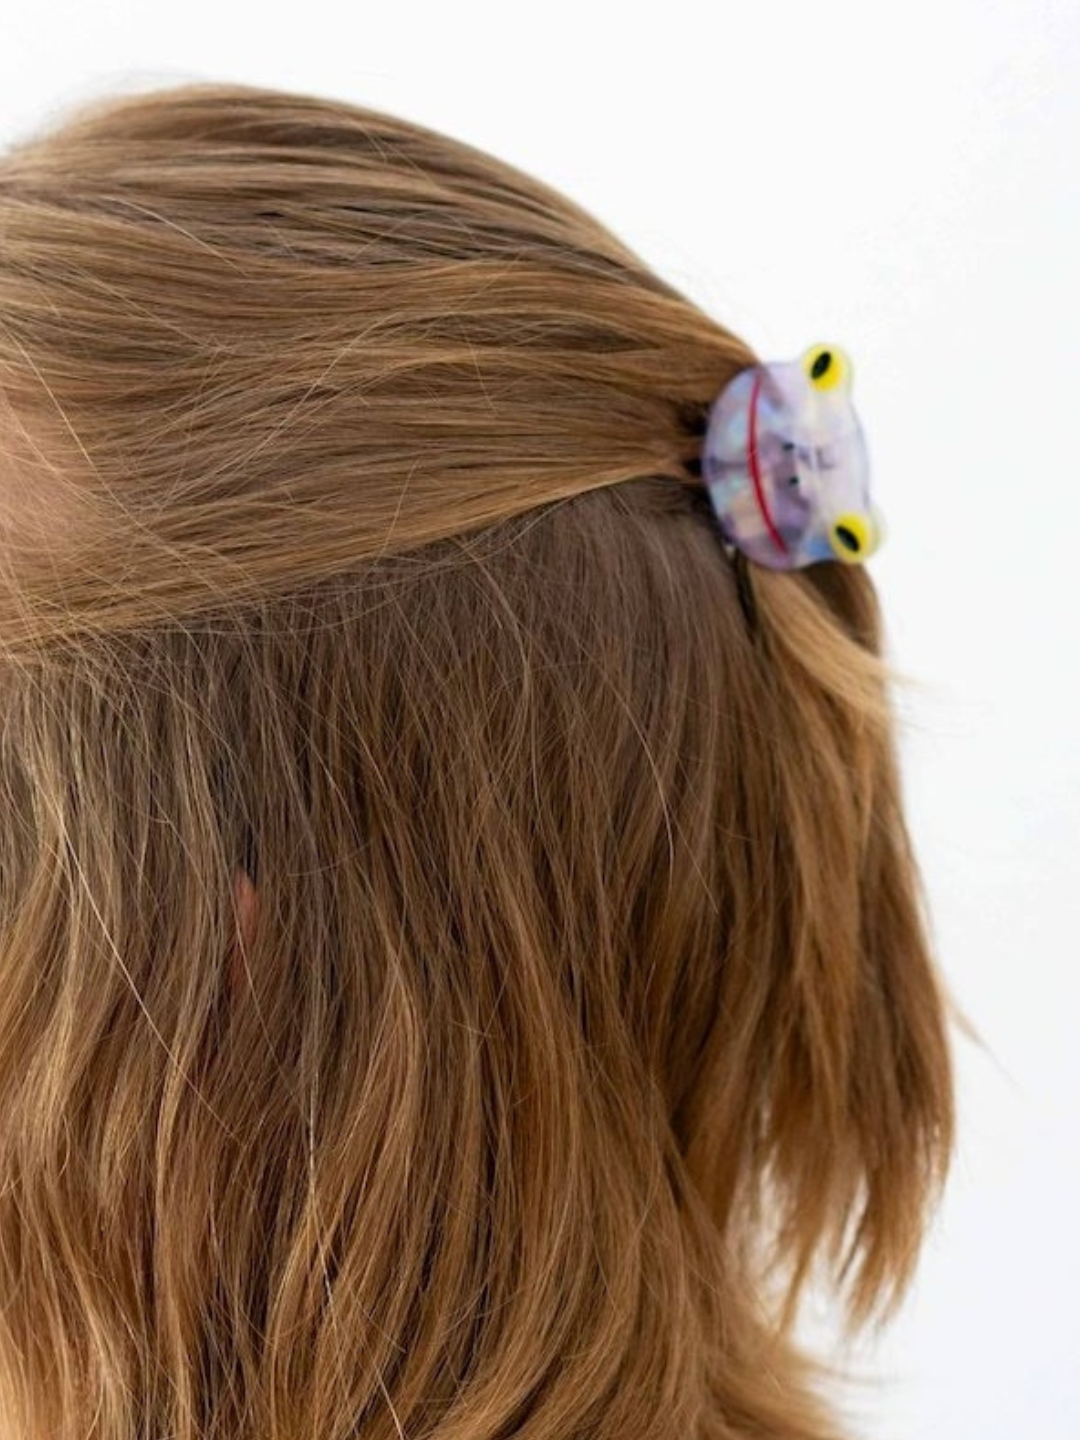 Lilac froggy hairclip on a half up half down hairstyle